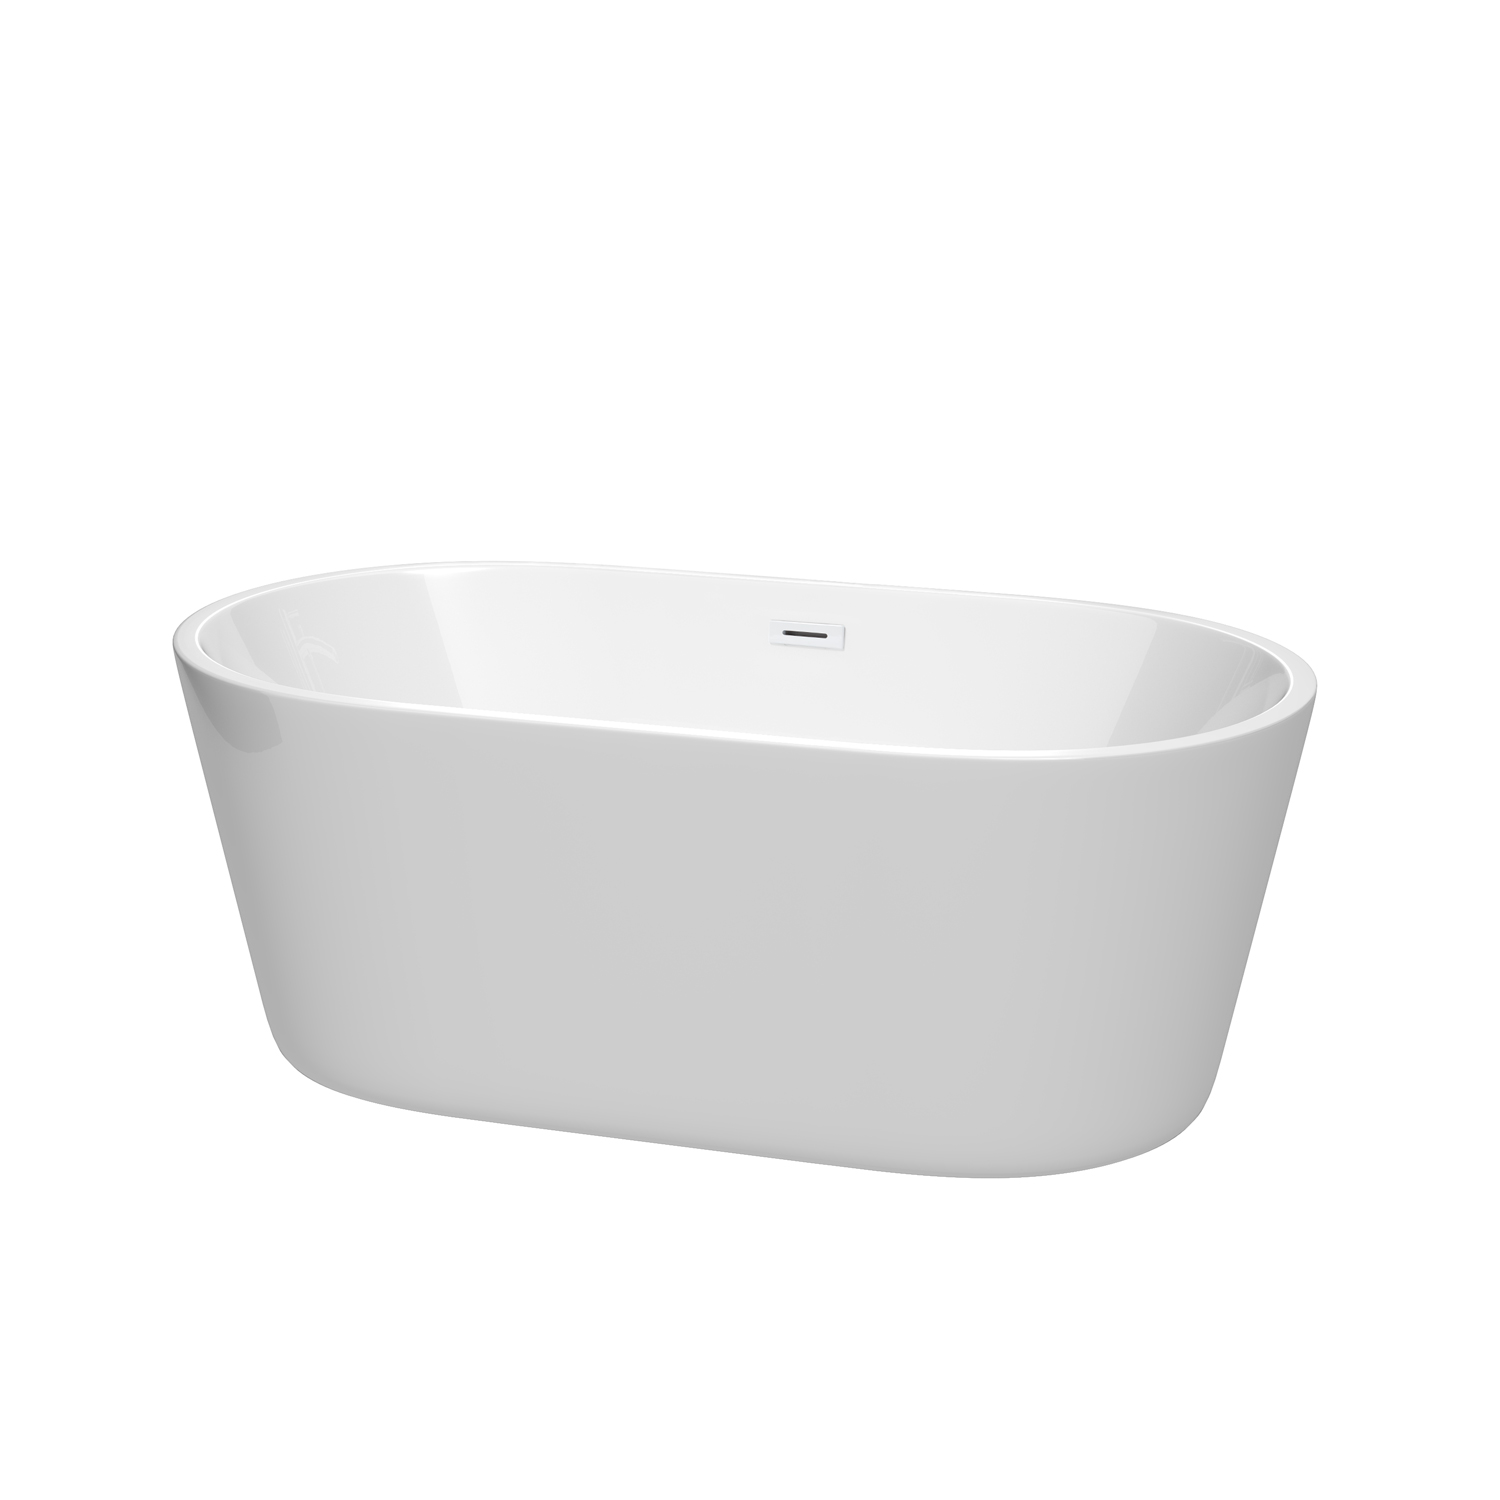 60" Freestanding Bathtub in White Finish with Shiny White Pop-up Drain and Overflow Trim